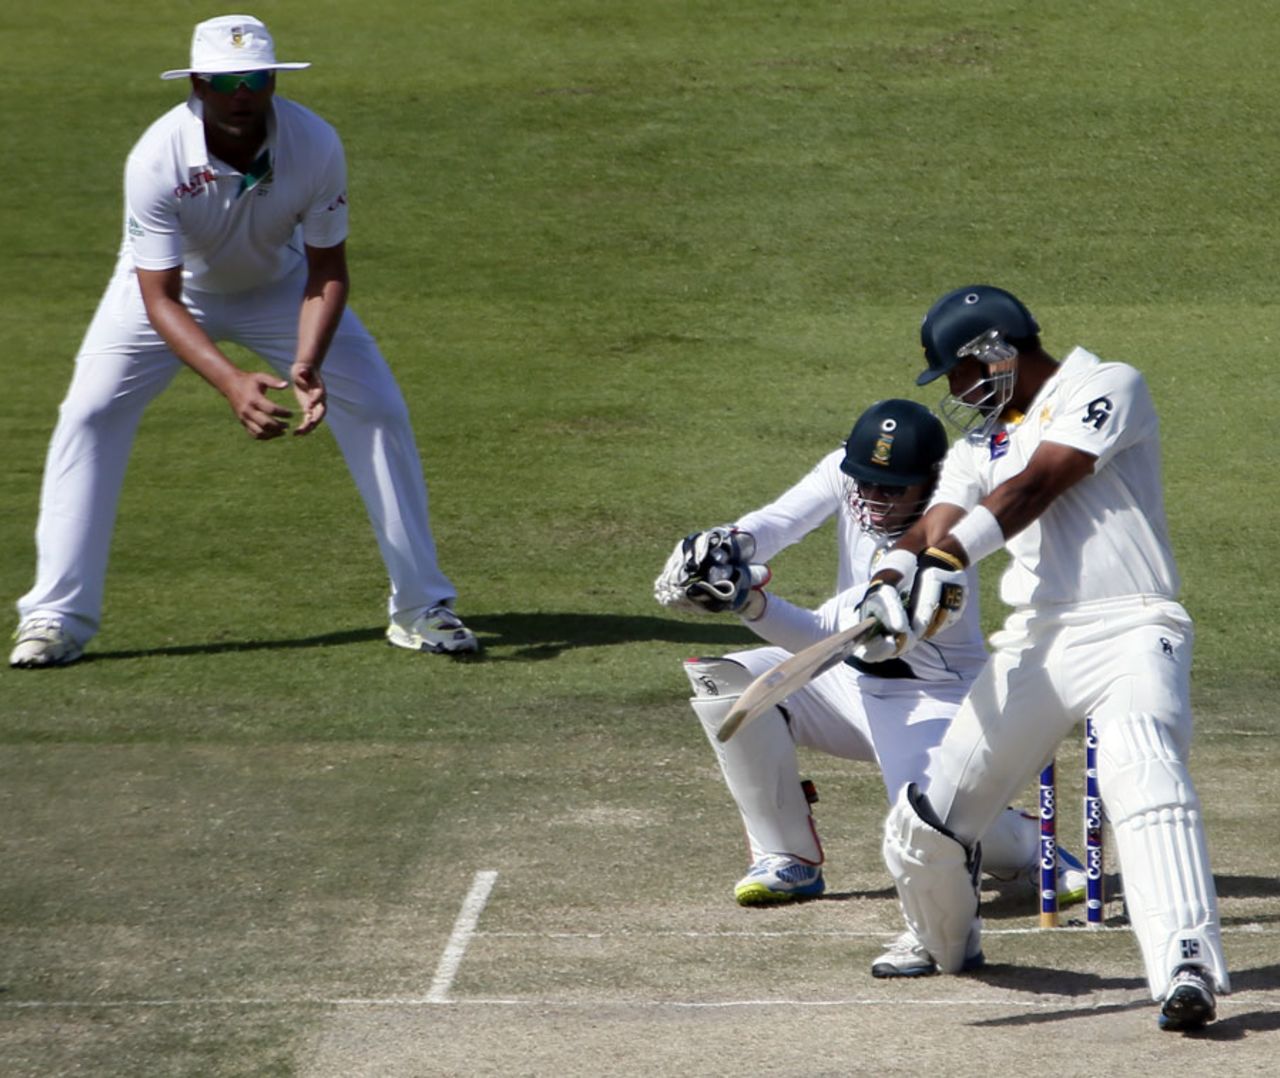 Khurram Manzoor cuts one square, Pakistan v South Africa, 1st Test, Abu Dhabi, 2nd day, October 15, 2013